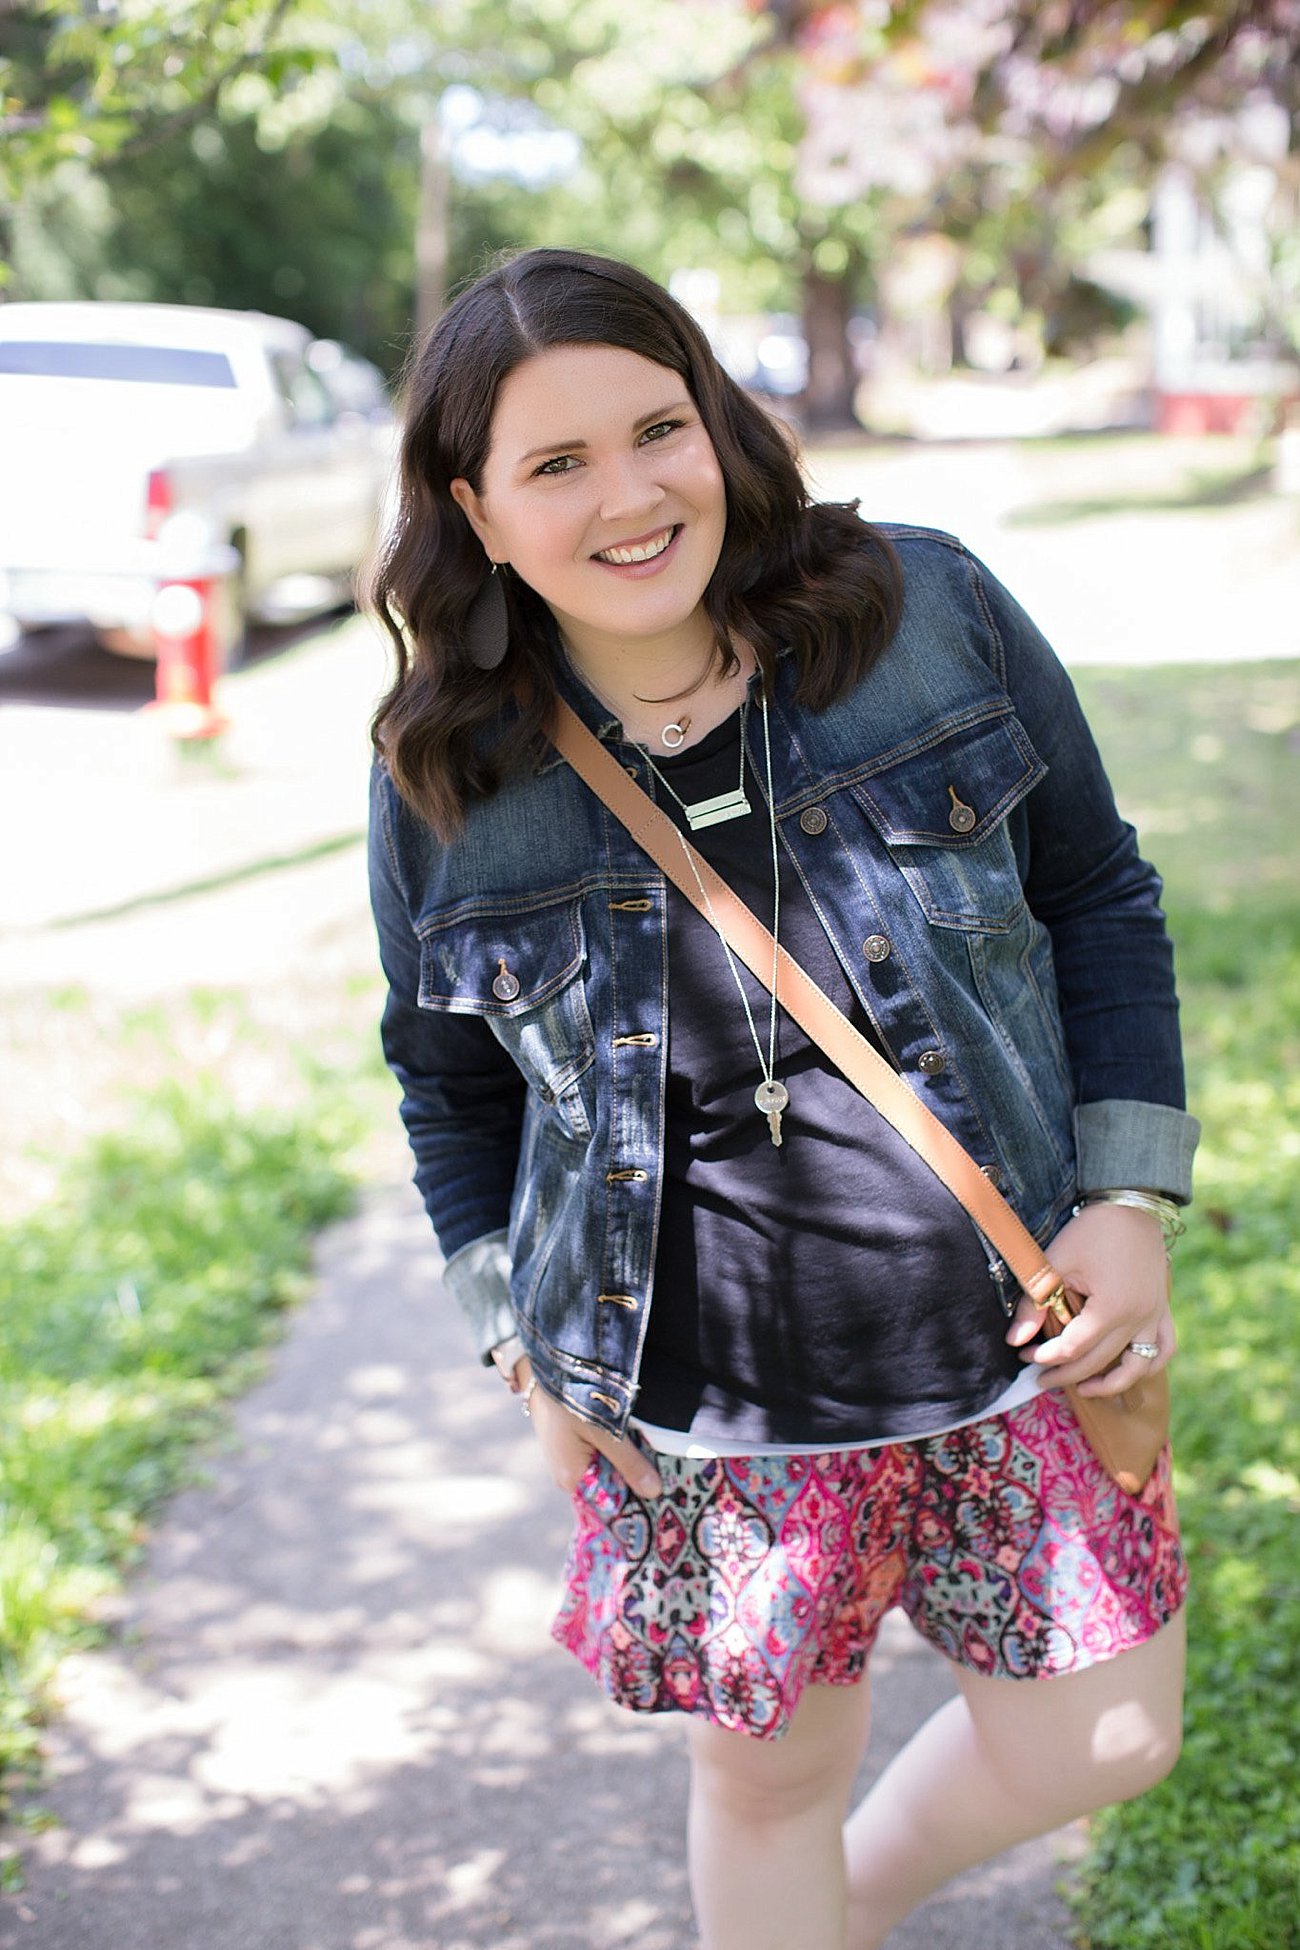 Threads 4 Thought Mona Skort, Stitch Fix Just USA Denim Jacket, Sudara Goods Globetrotter Tee, Sseko Designs Foldover Crossbody Clutch, The Root Collective shoes | Ethical Fashion & Style Blogger (4)